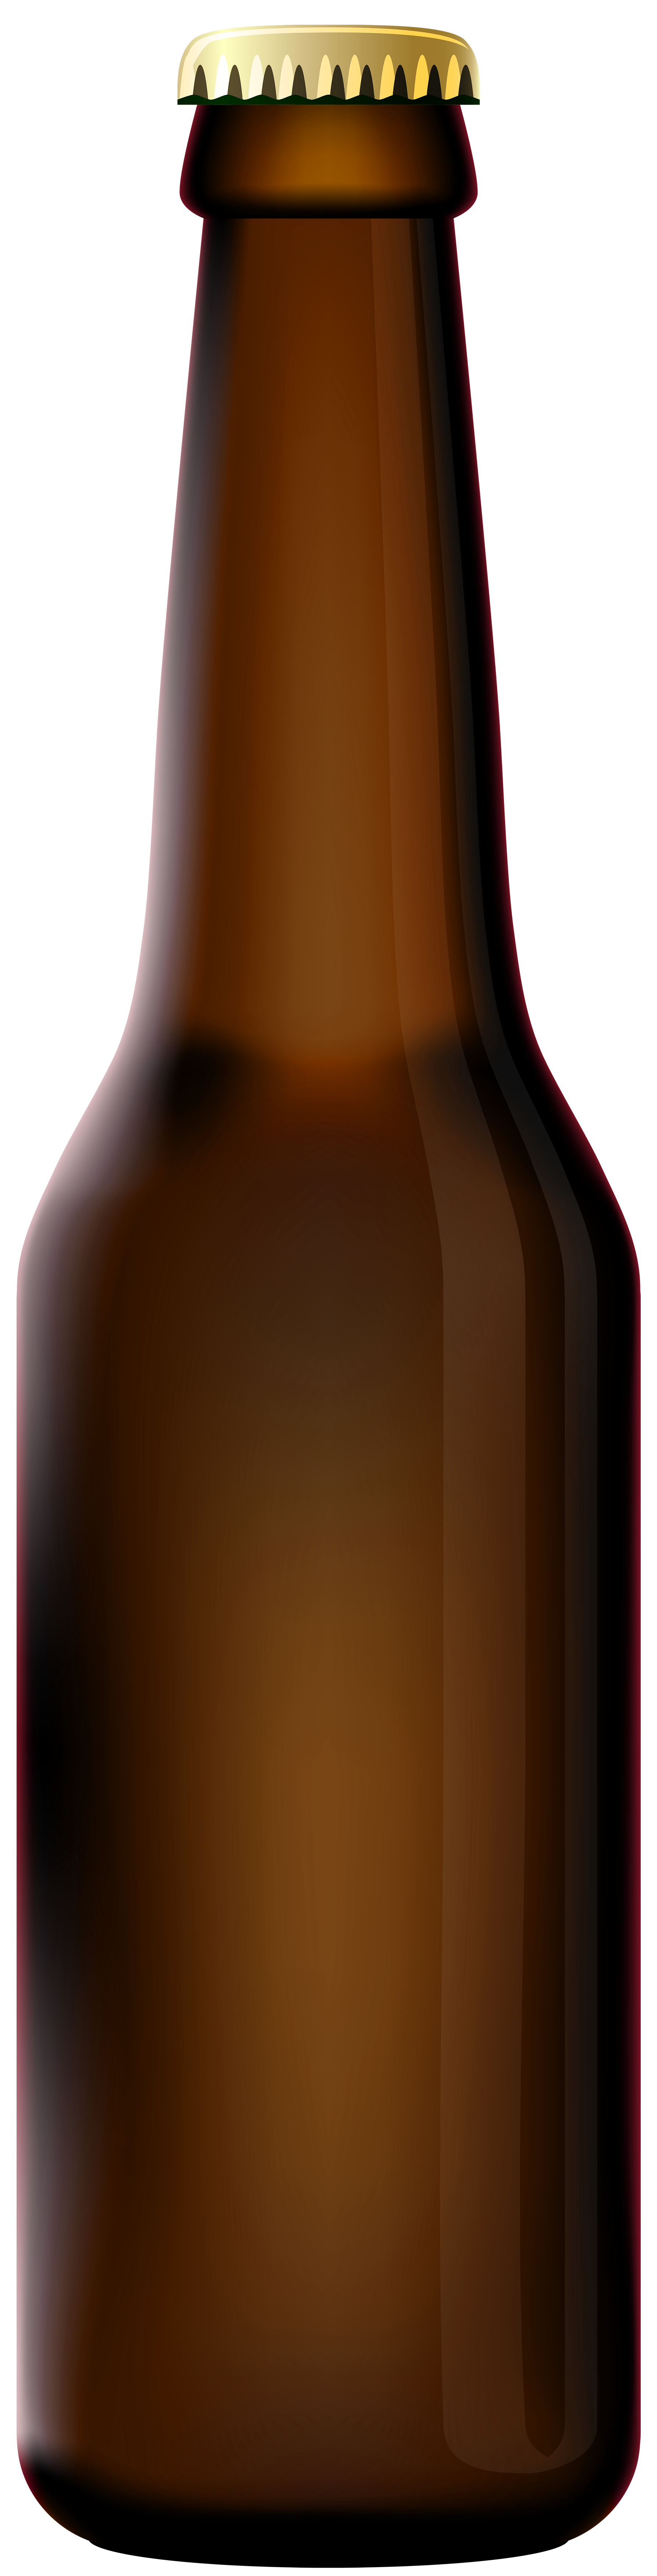 Glass Beer Bottle Free HQ Image Clipart